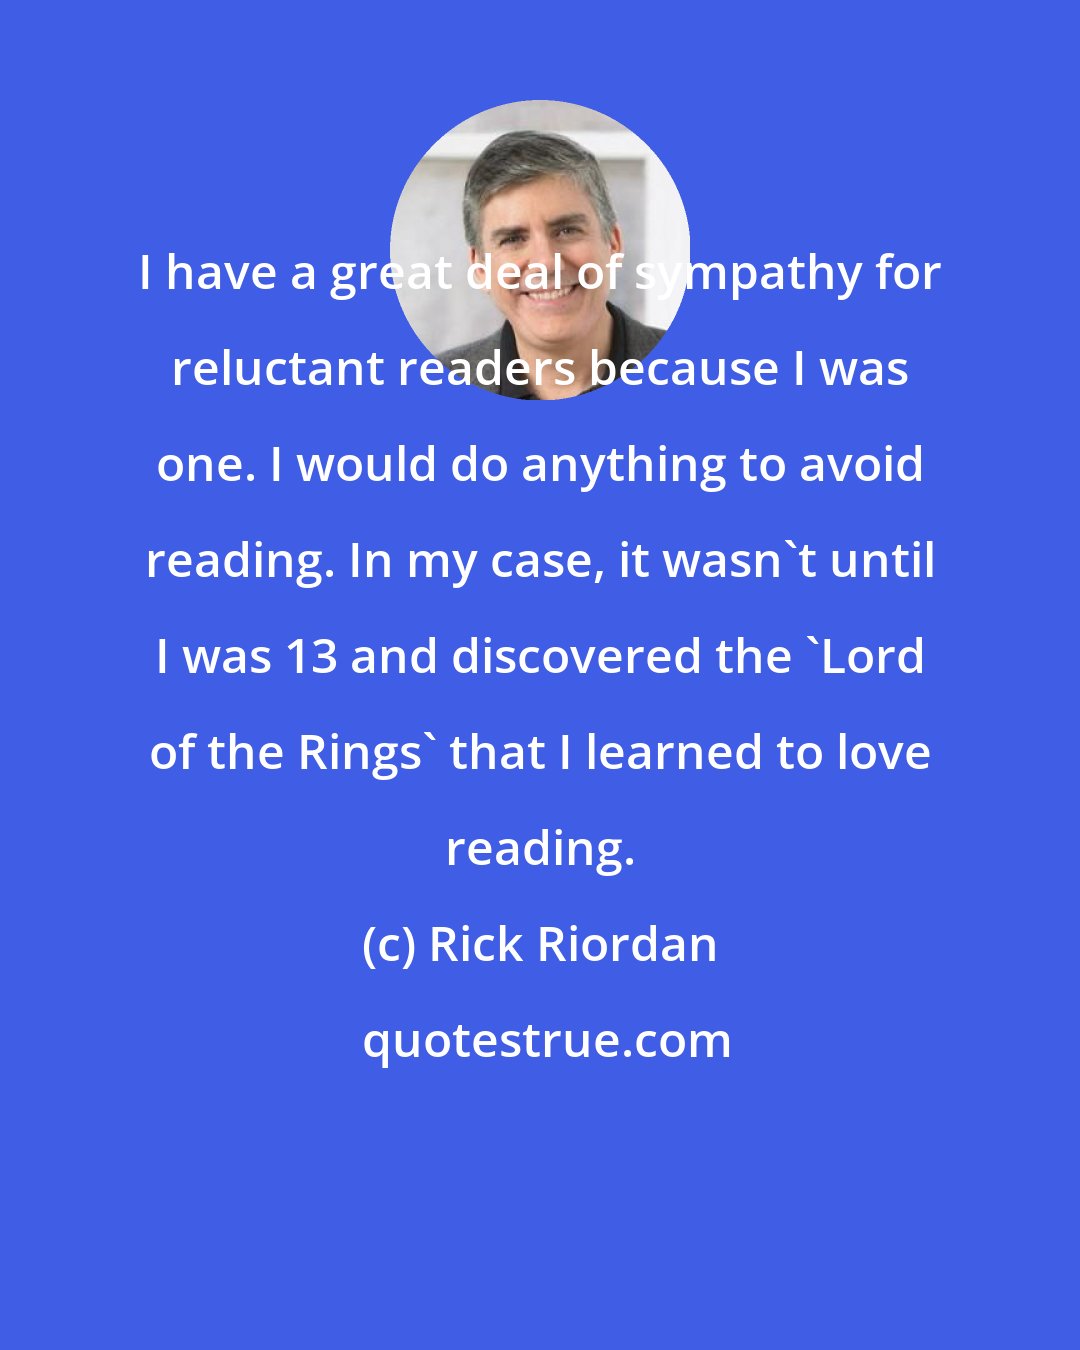 Rick Riordan: I have a great deal of sympathy for reluctant readers because I was one. I would do anything to avoid reading. In my case, it wasn't until I was 13 and discovered the 'Lord of the Rings' that I learned to love reading.